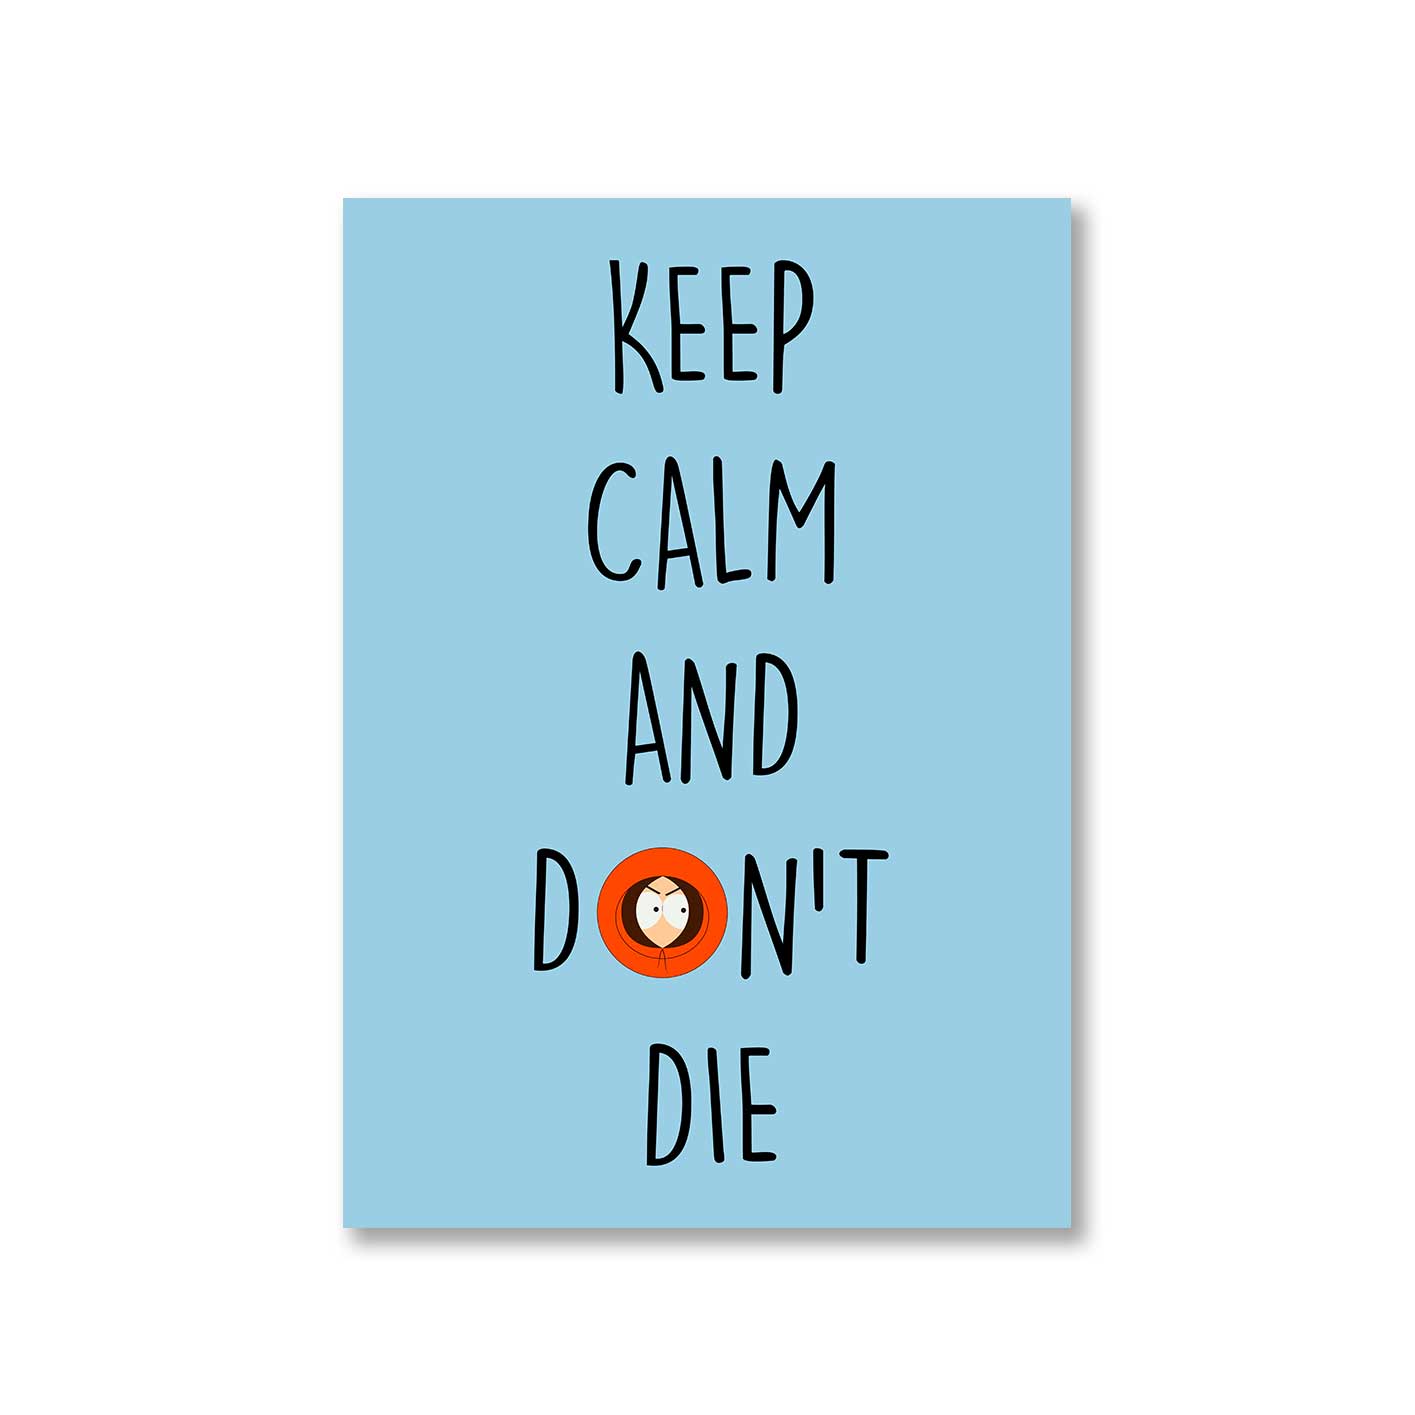 south park keep calm & don't die poster wall art buy online india the banyan tee tbt a4 south park kenny cartman stan kyle cartoon character illustration keep calm